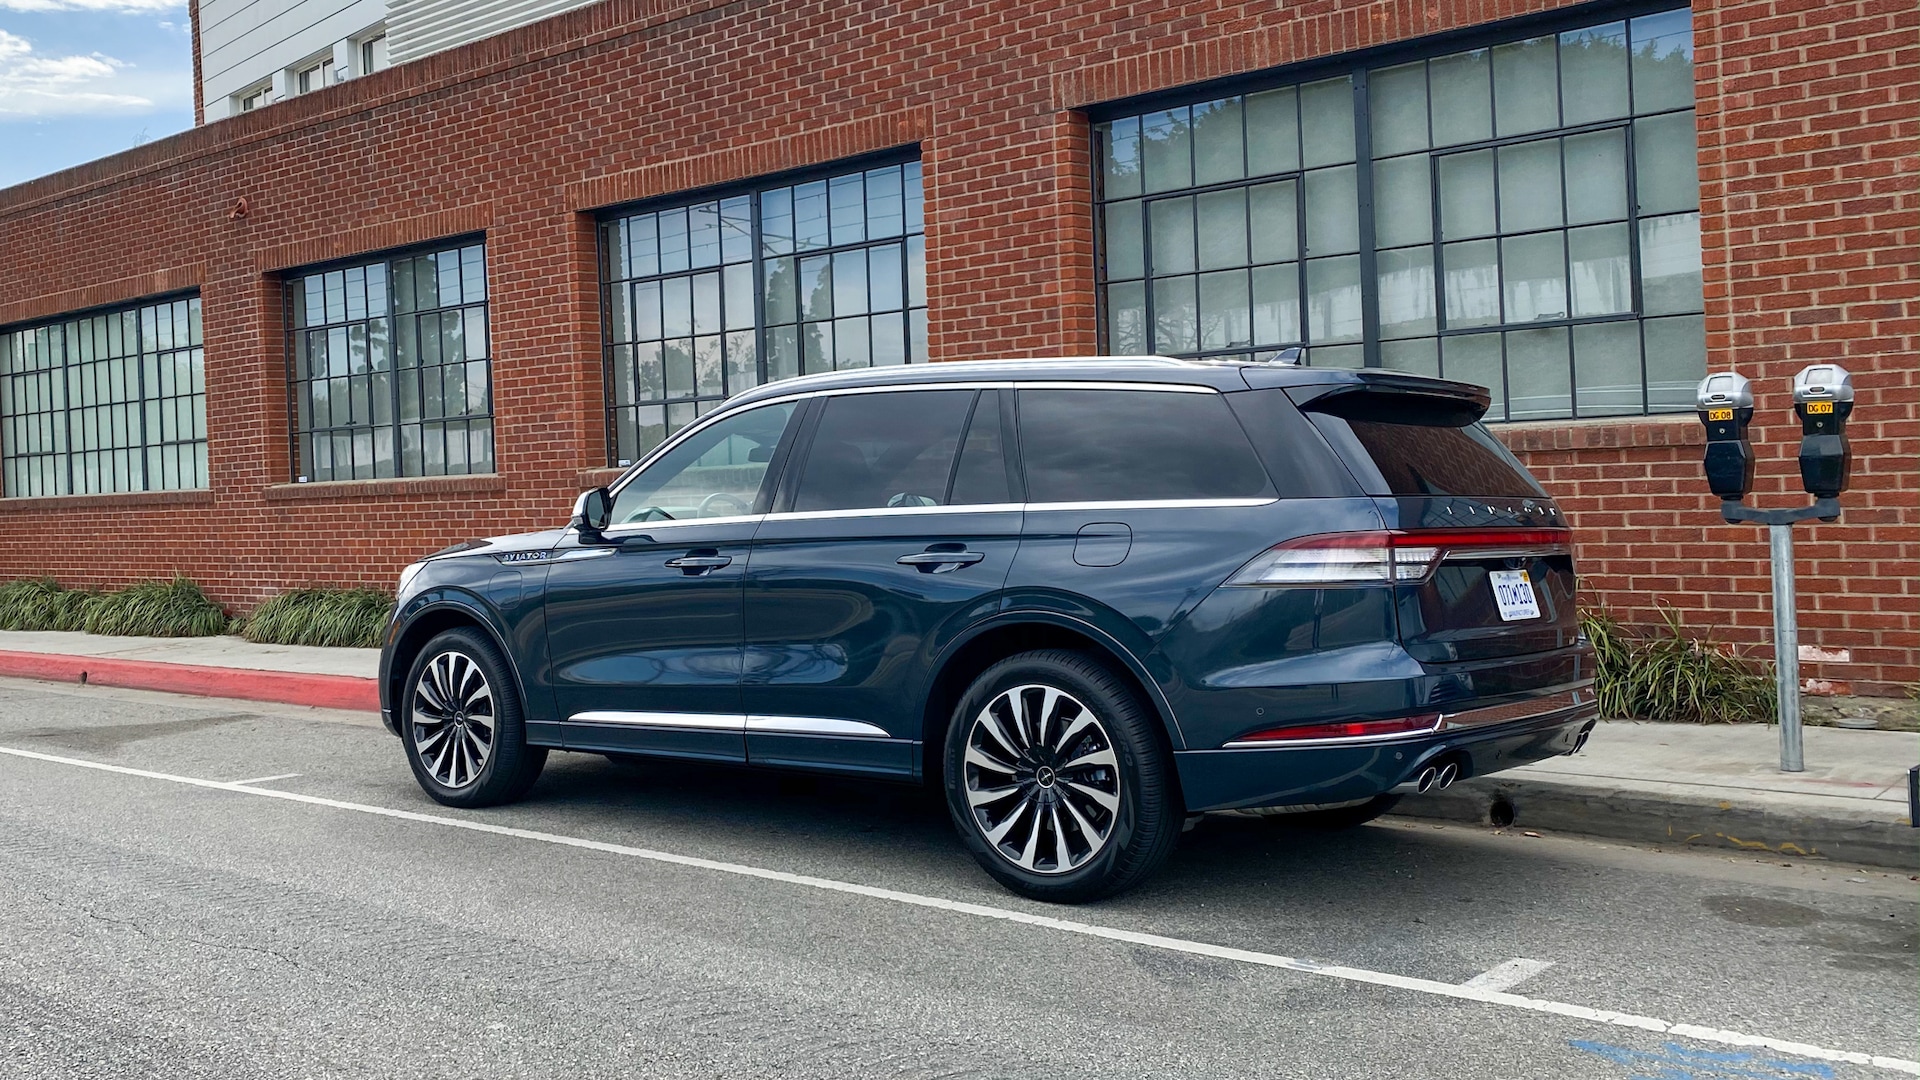 Lincoln Aviator Grand Touring Wallpapers